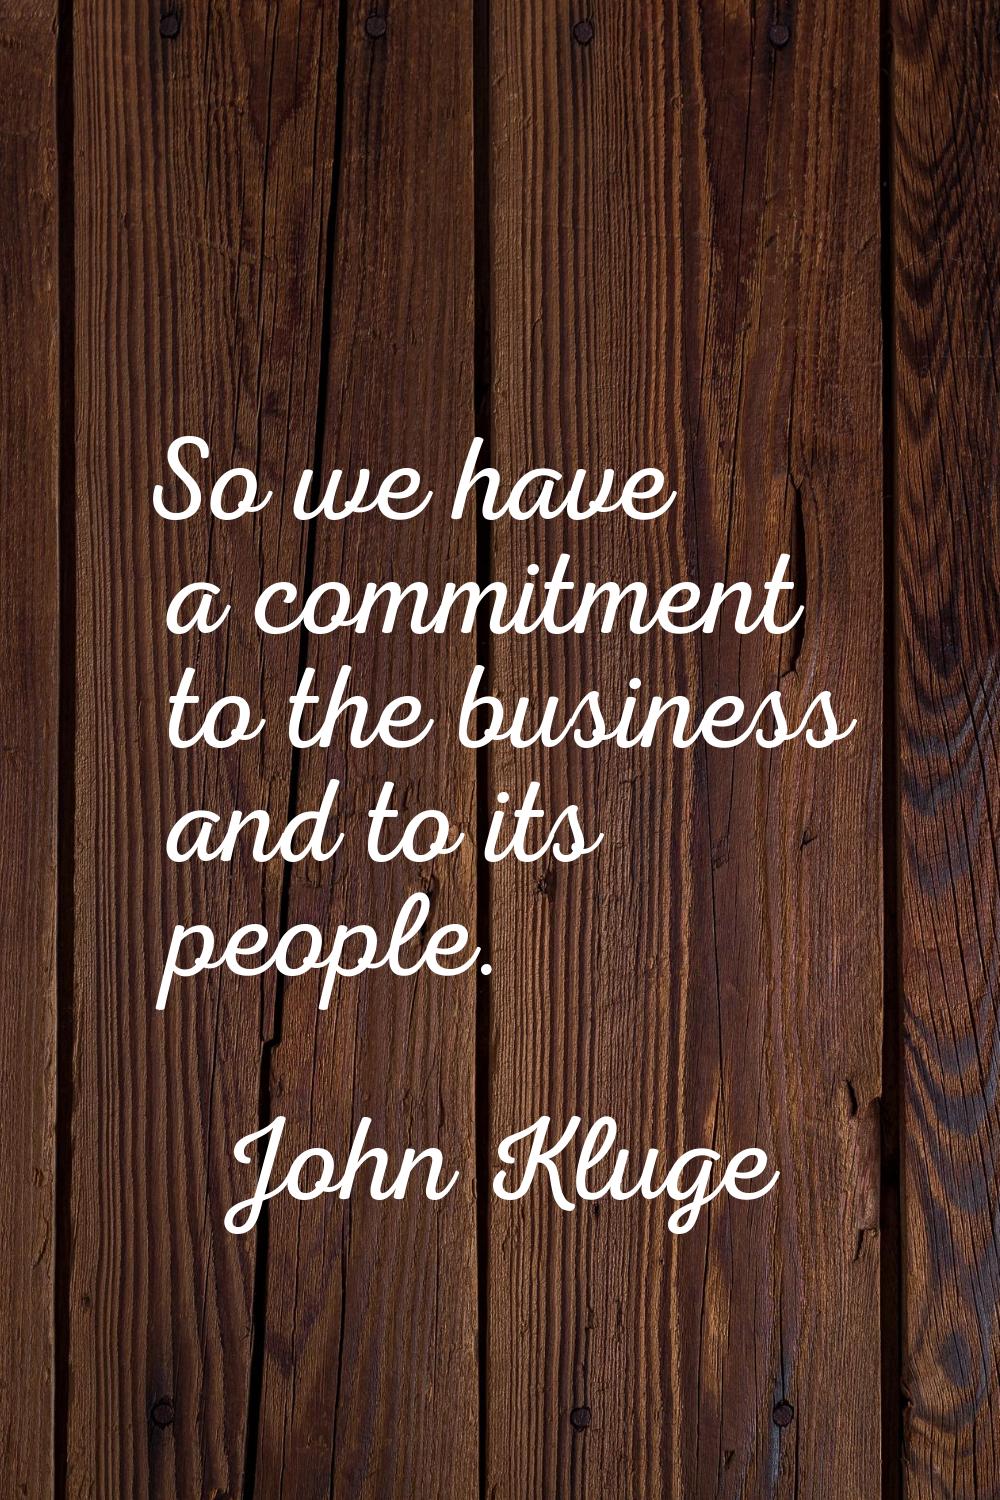 So we have a commitment to the business and to its people.